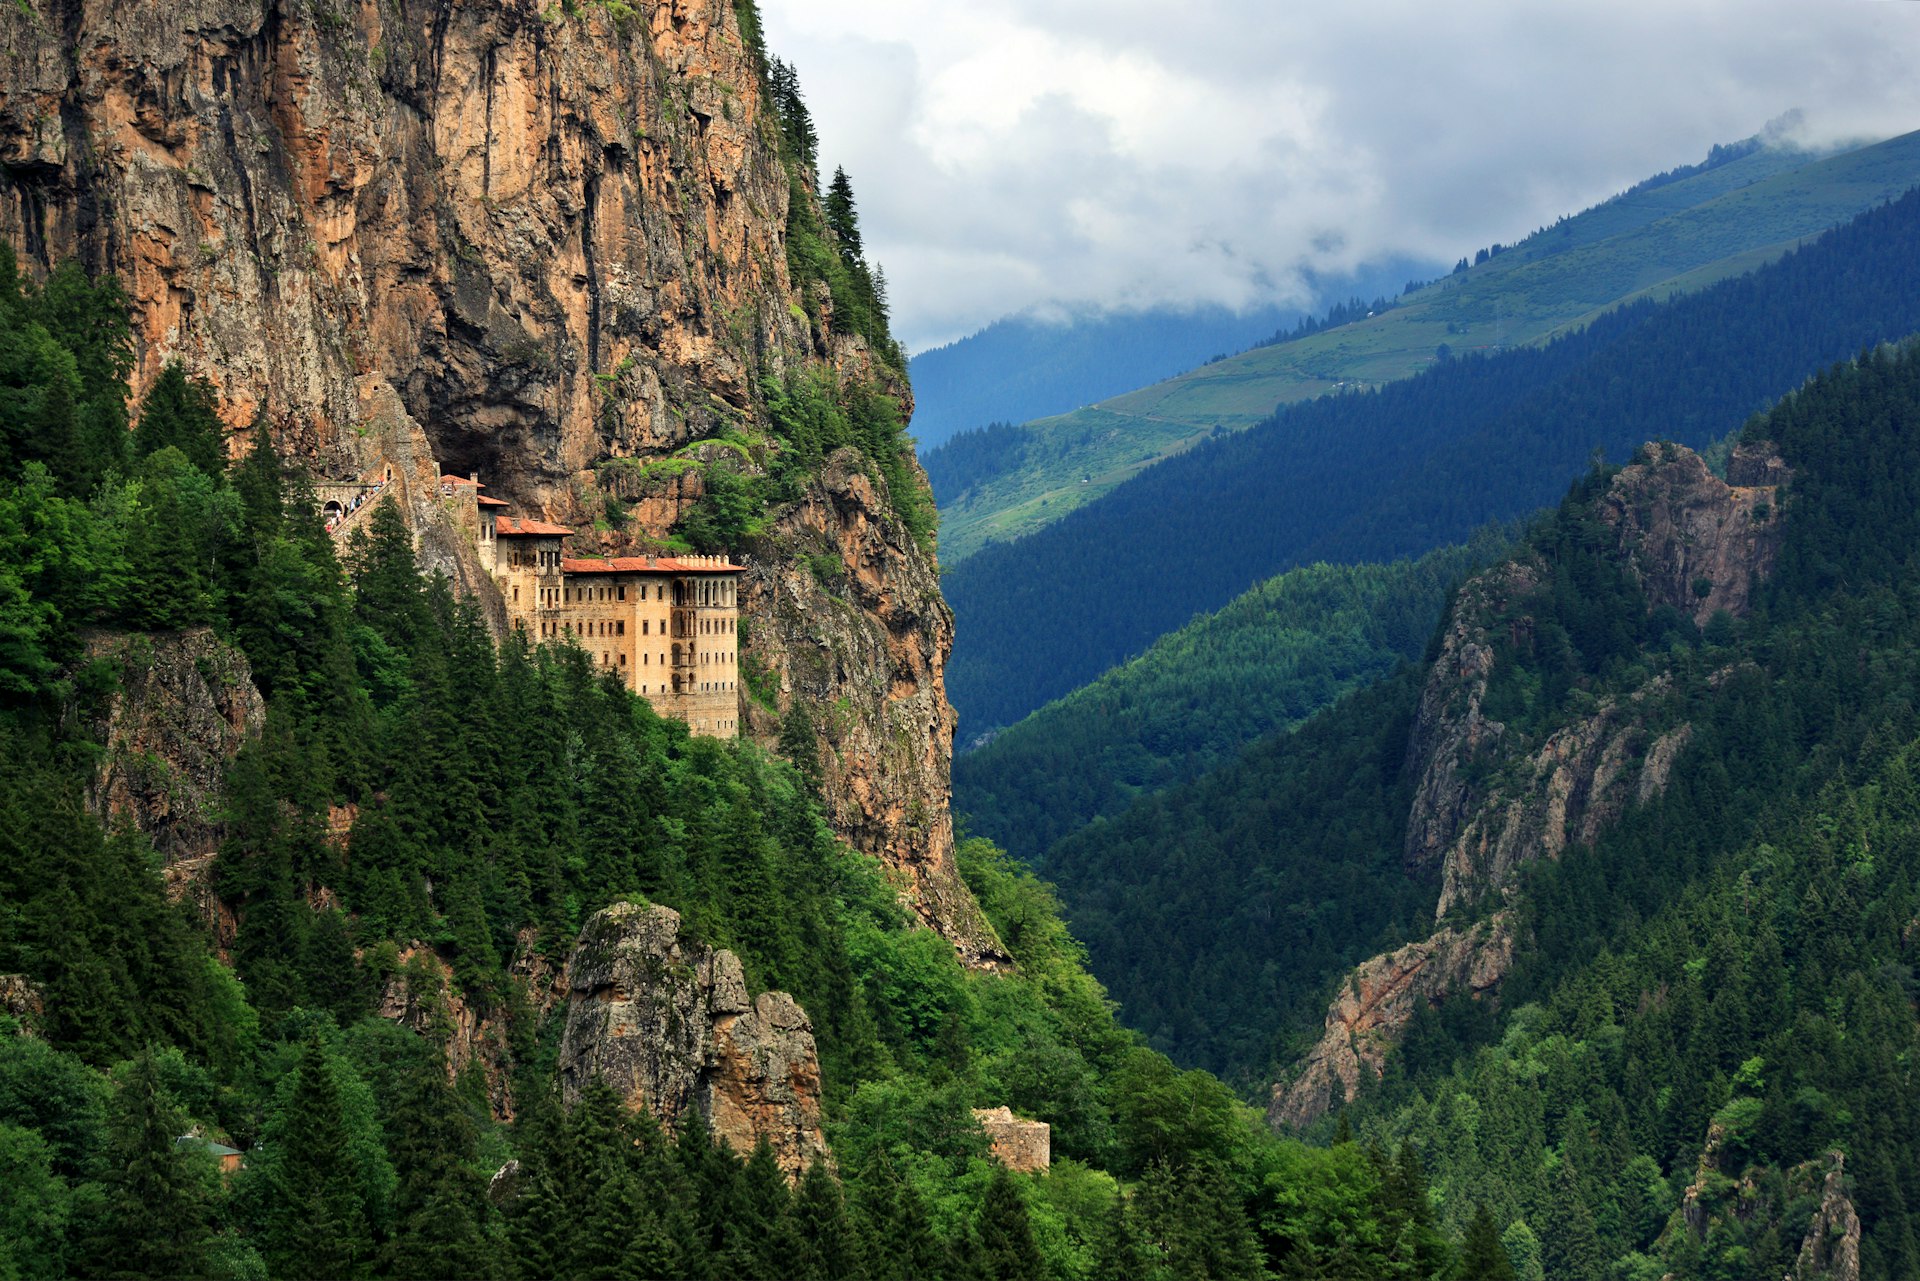 A monastery building built into the side of a huge cliff high up above a valley